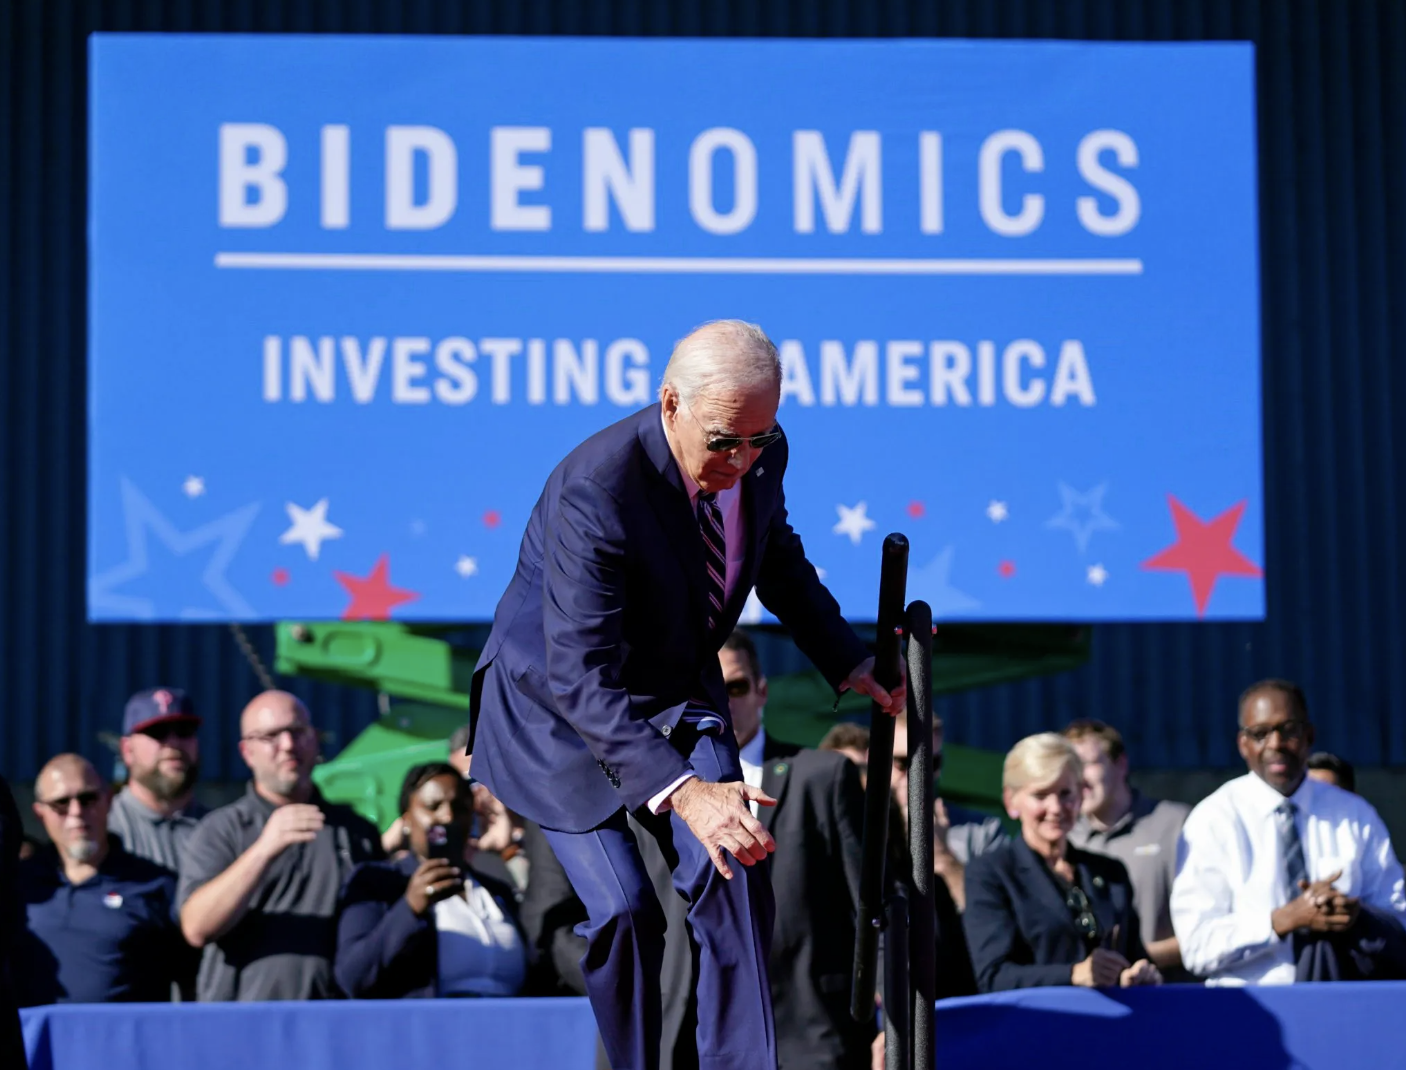 Biden tripped twice while walking up a small set of stairs to speak on a stage at the Tioga Marine Terminal in Philadelphia